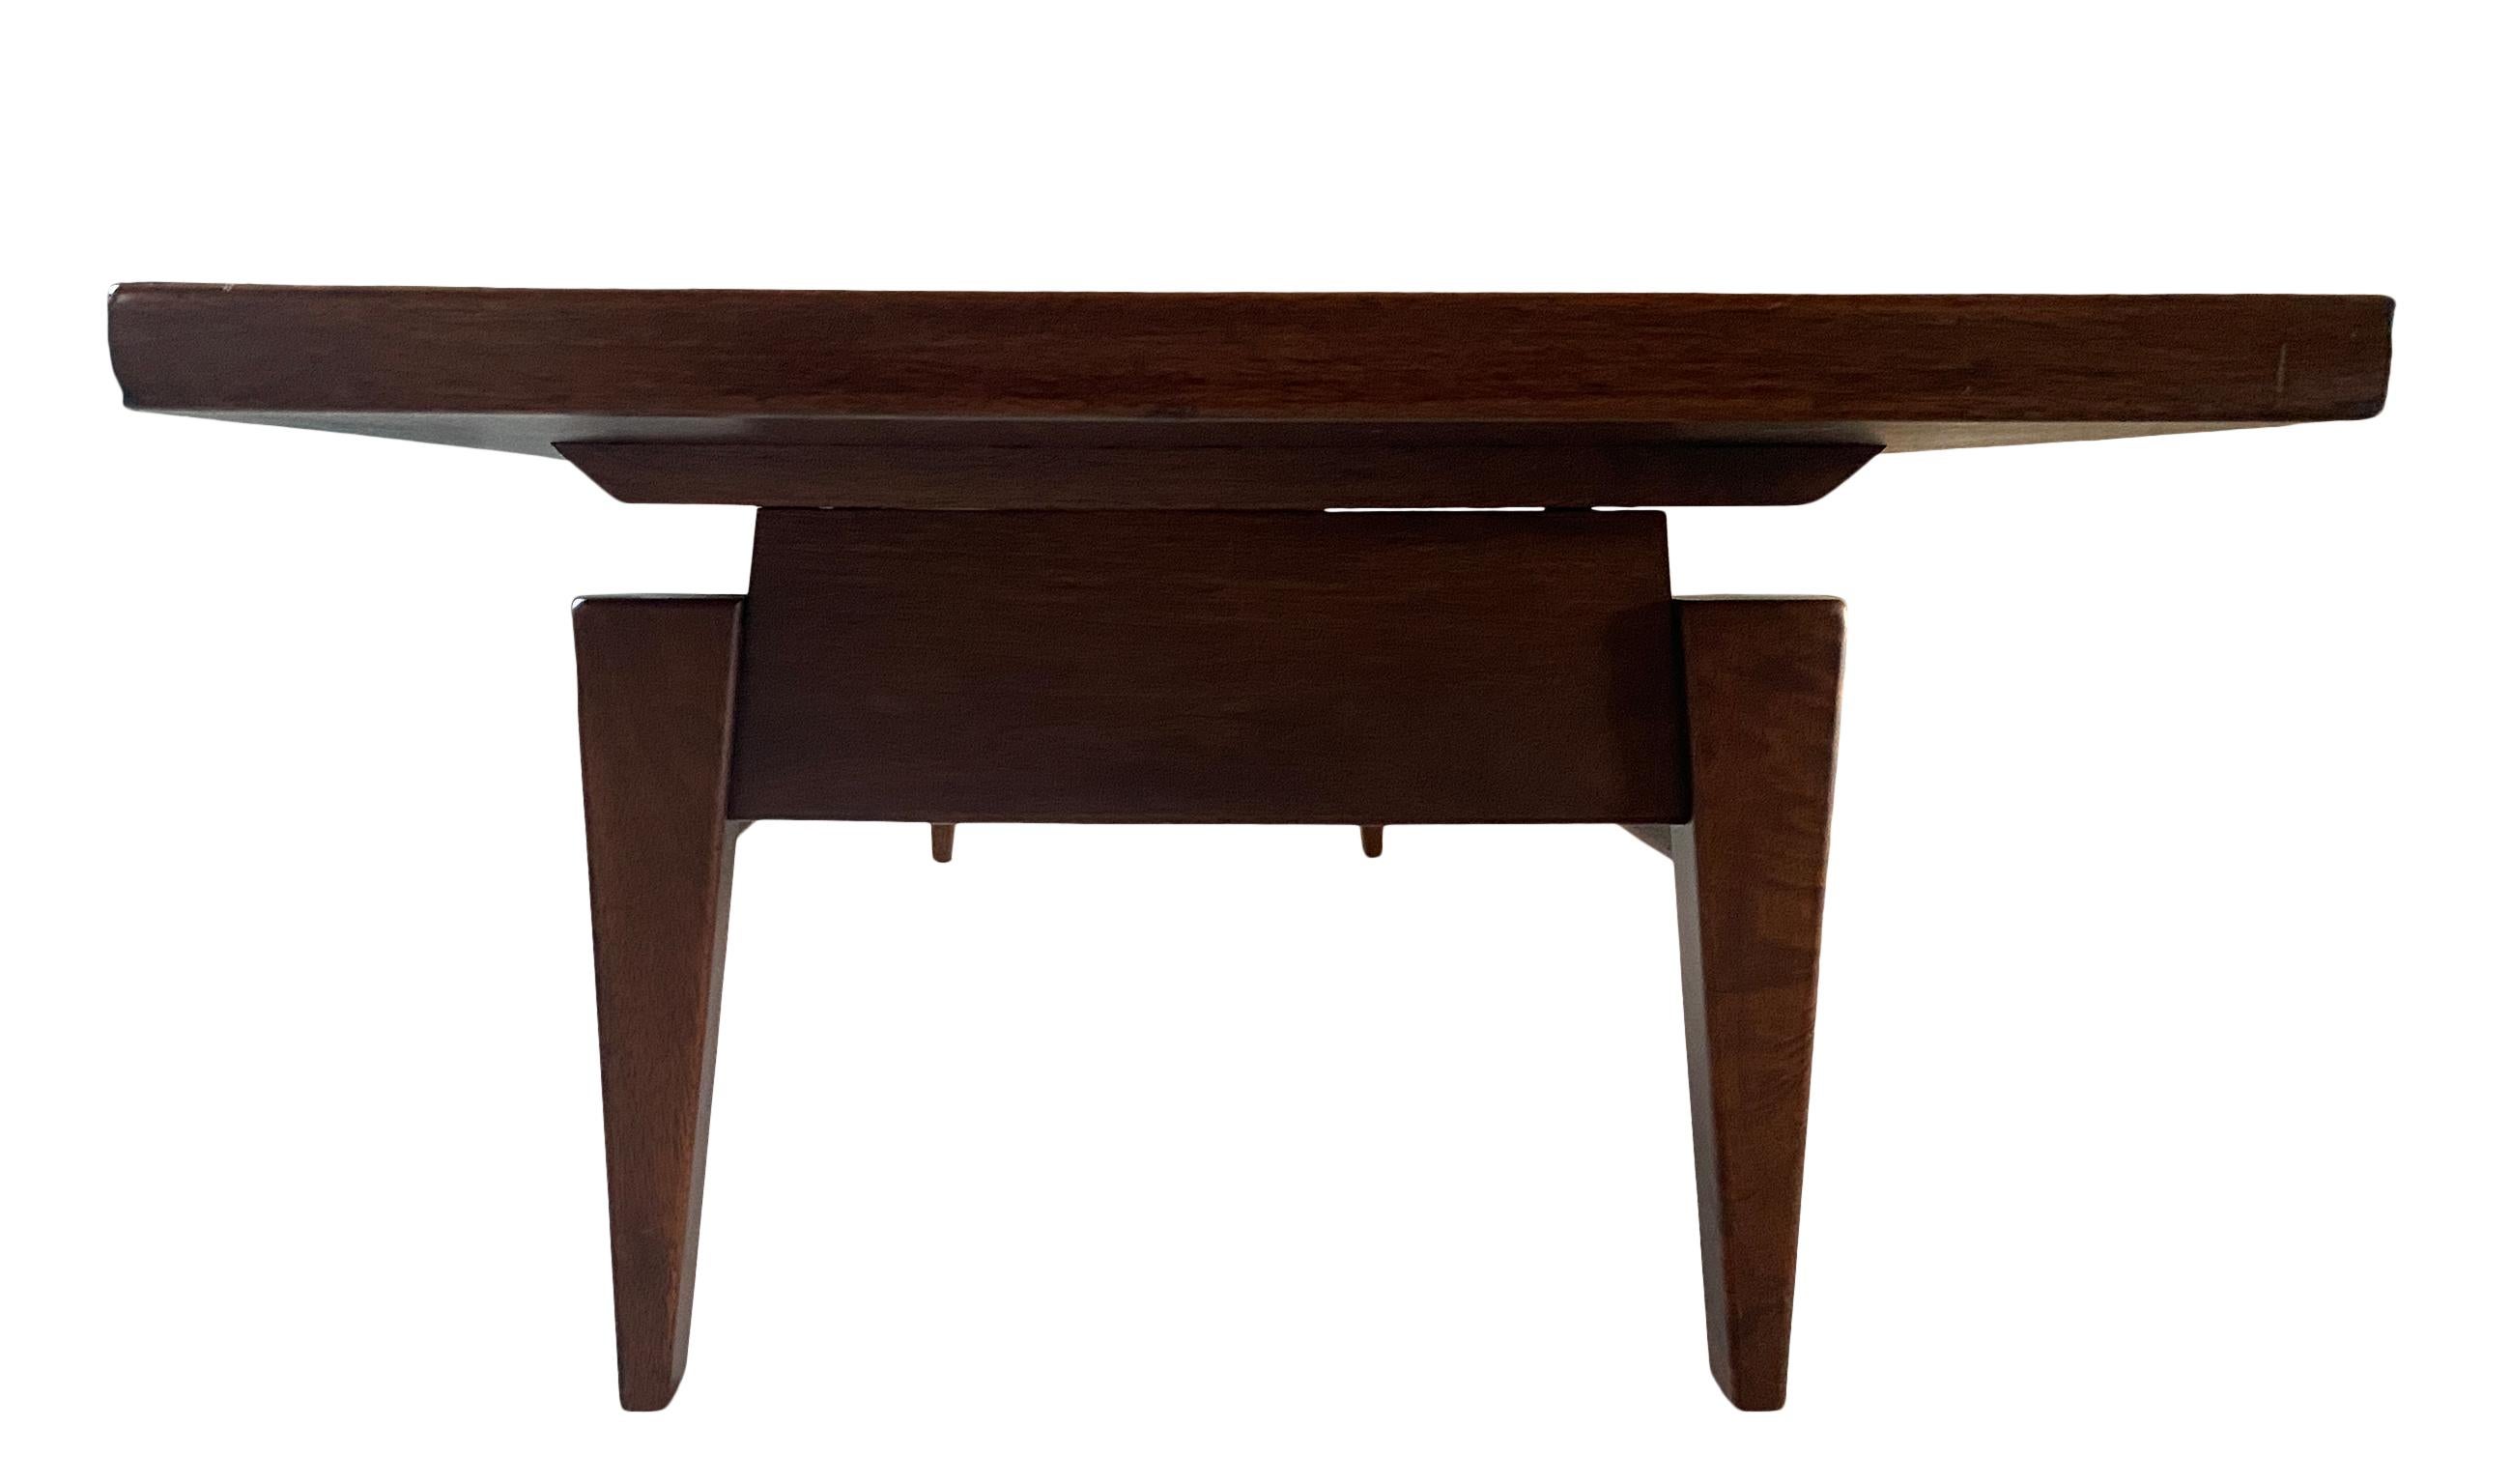 American Midcentury Jens Risom Design Walnut Floating Top Coffee Table Bench For Sale